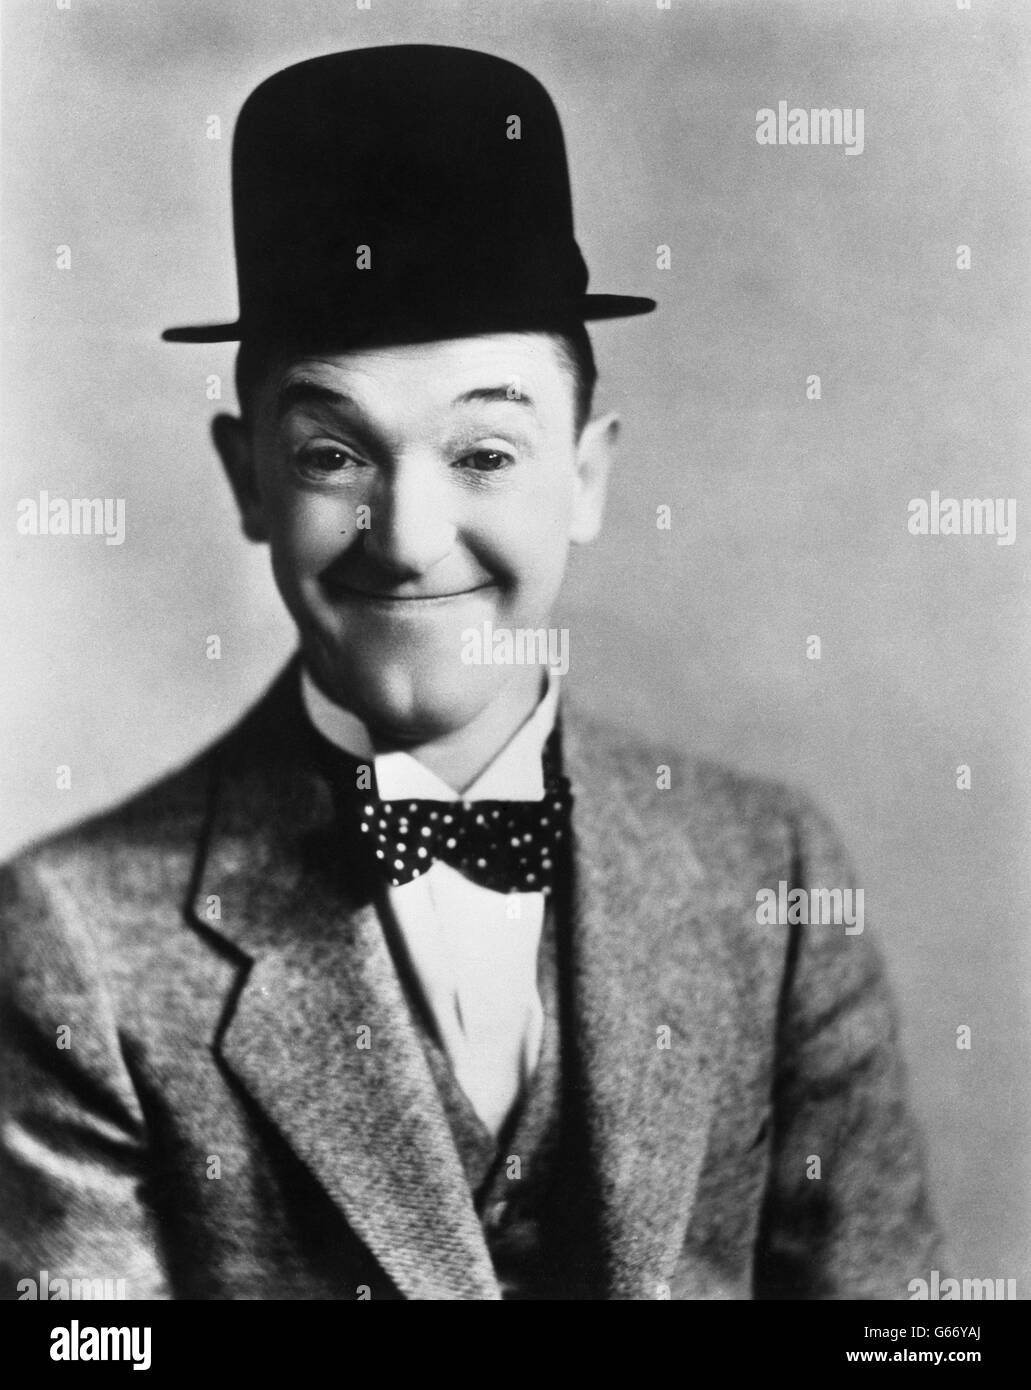 Stan Laurel and his fifth wife. Married despite protests of fourth Mrs  Laurel. Stan Laurel, member of the Laurel and Hardy film comedy team,  photographed with his wife, formerly known as Illiana